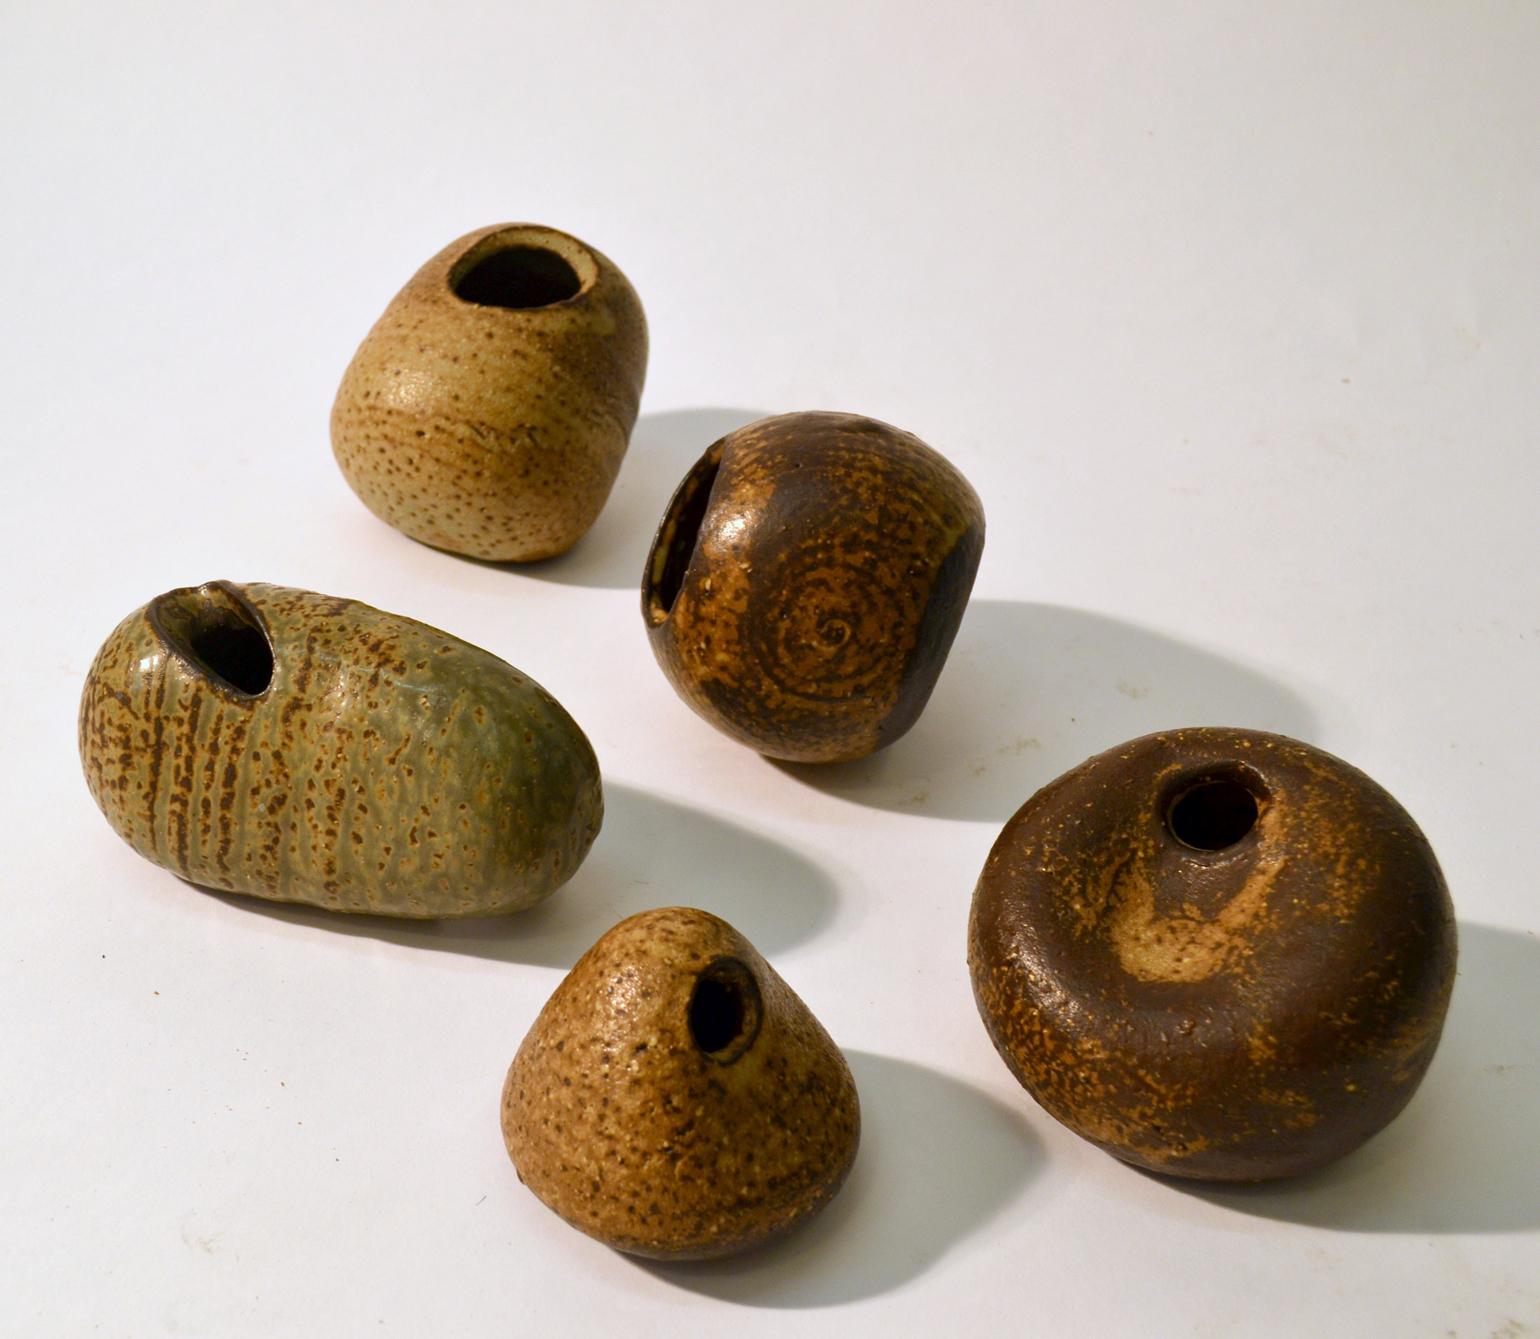 Dutch Group of Studio Ceramic Free Form Pebble Vases in Earth Tones by Jaan Mobach For Sale